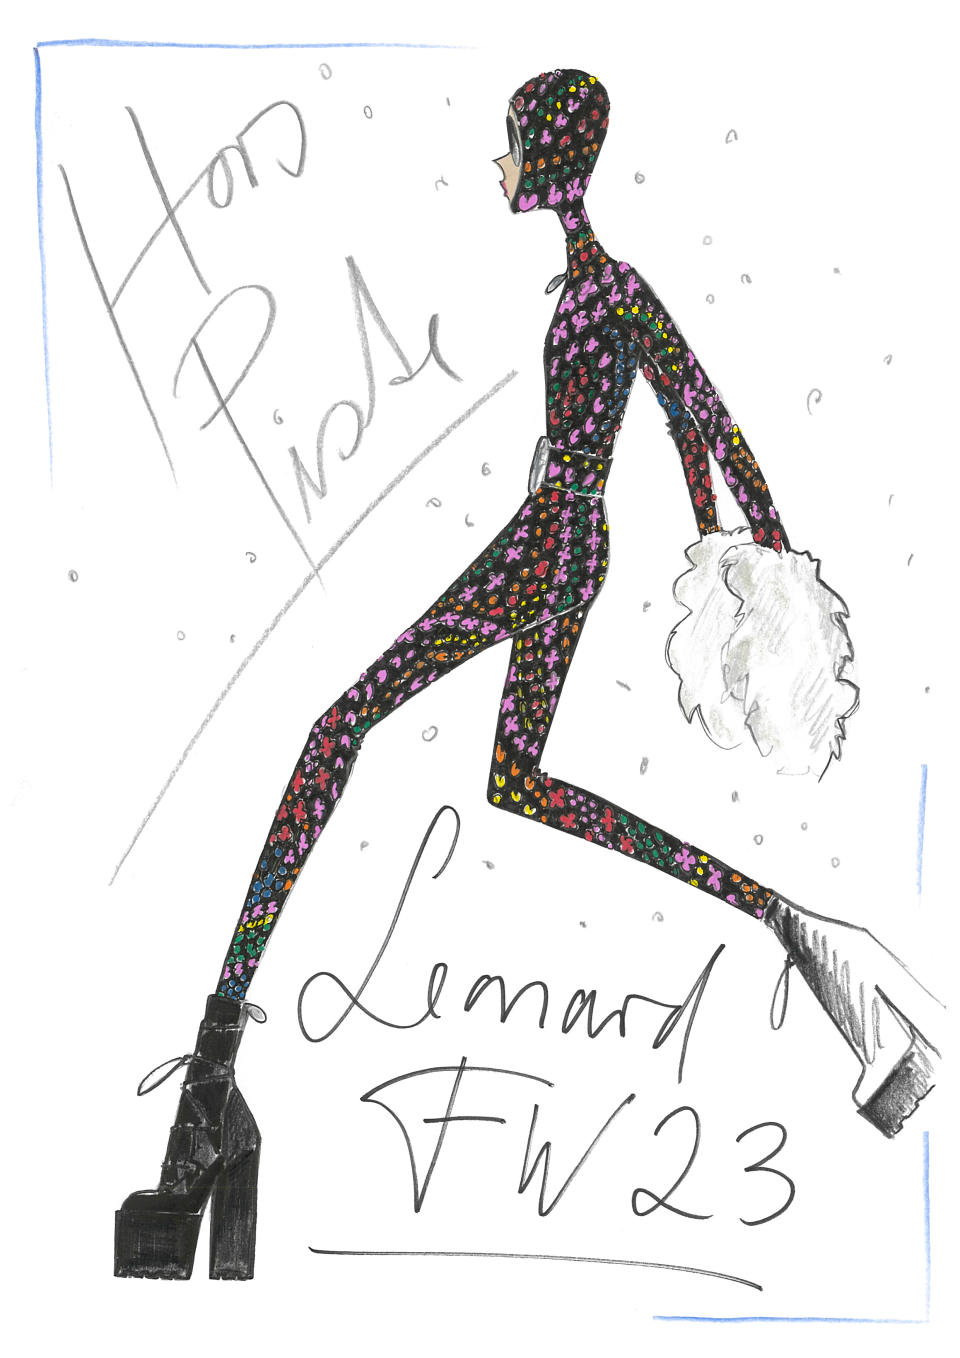 A sketch by Georg Lux for Leonard Paris fall 2023. Georg Lux